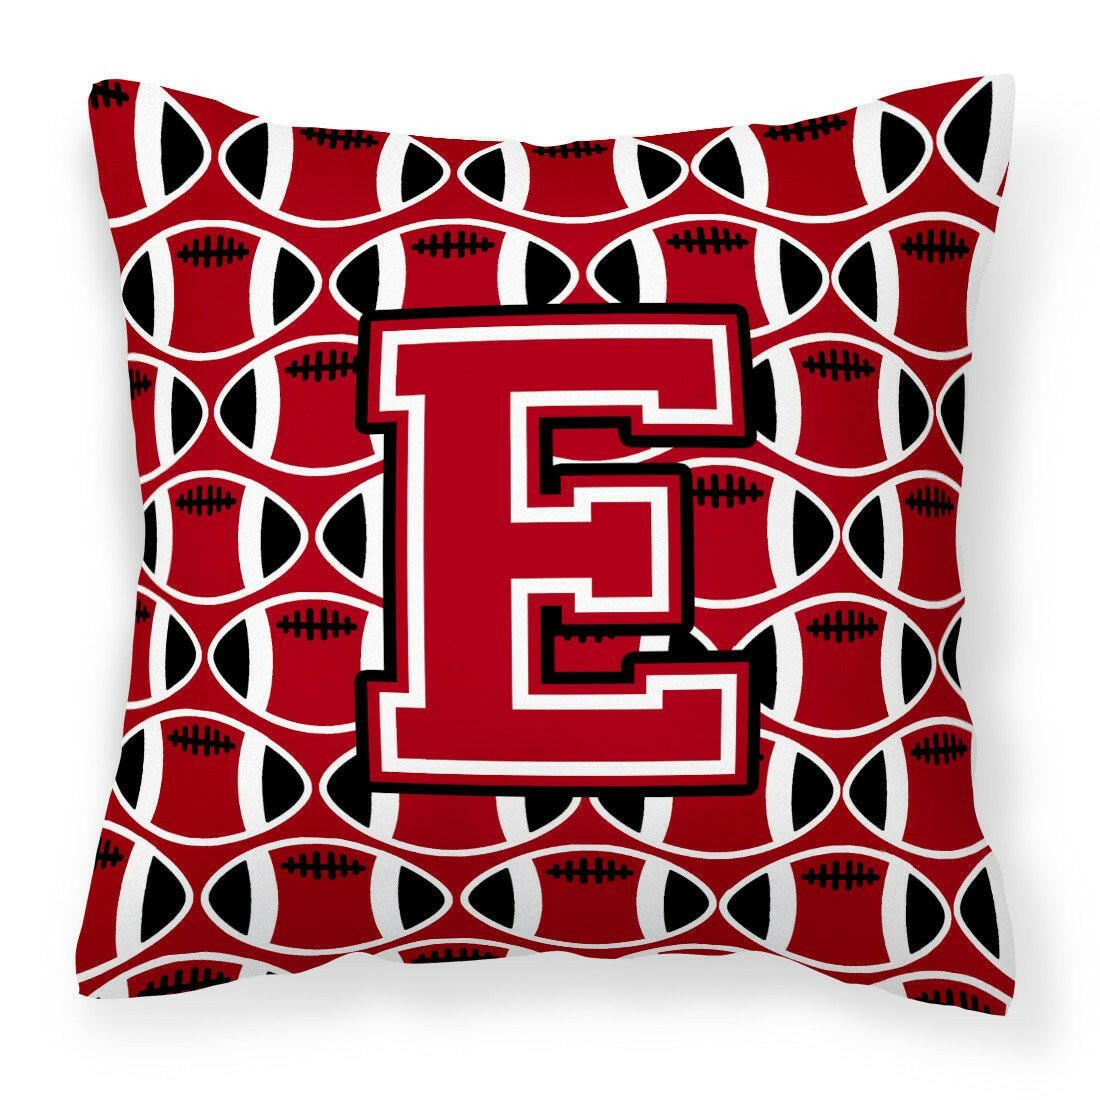 Letter E Football Red, Black and White Fabric Decorative Pillow CJ1073-EPW1414 by Caroline's Treasures